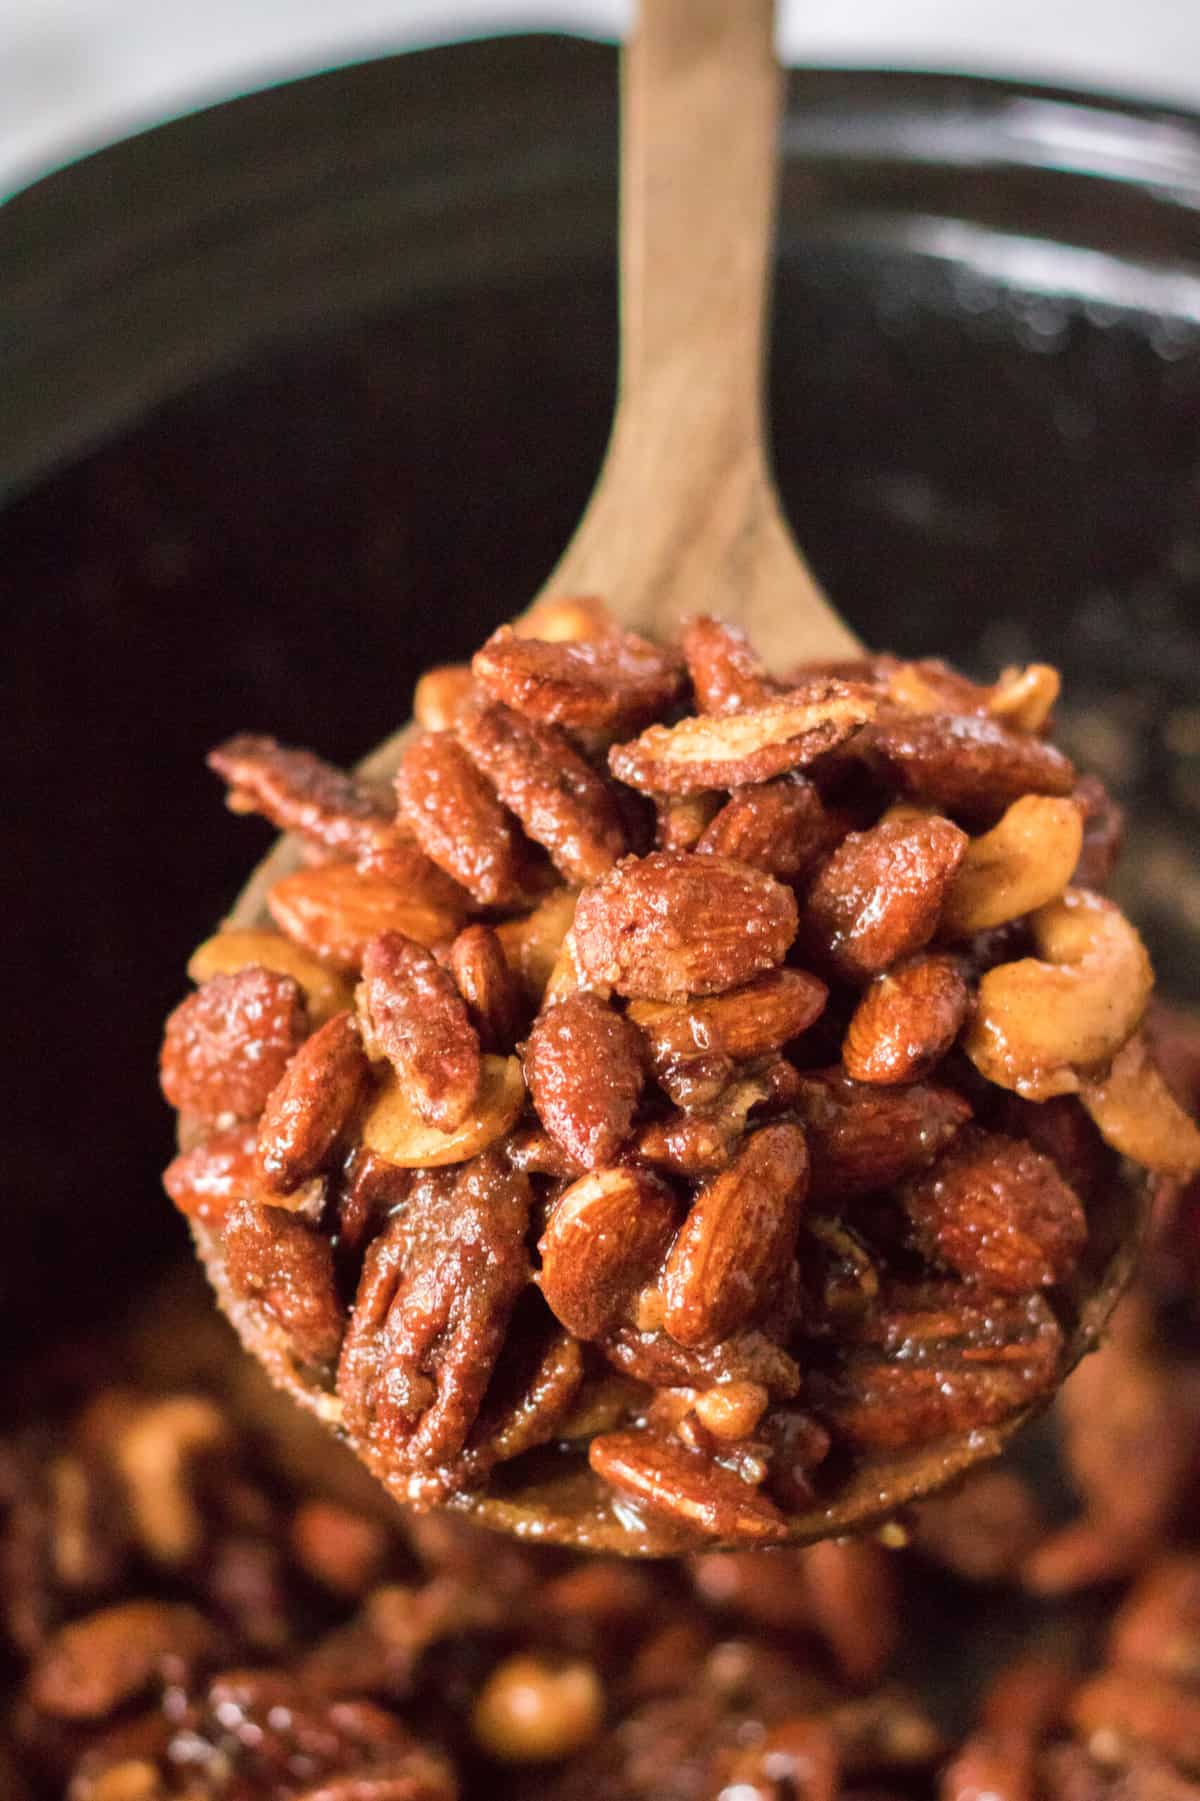 A wooden spoon is lifting a portion of cooked nuts from the bowl of a Crockpot.